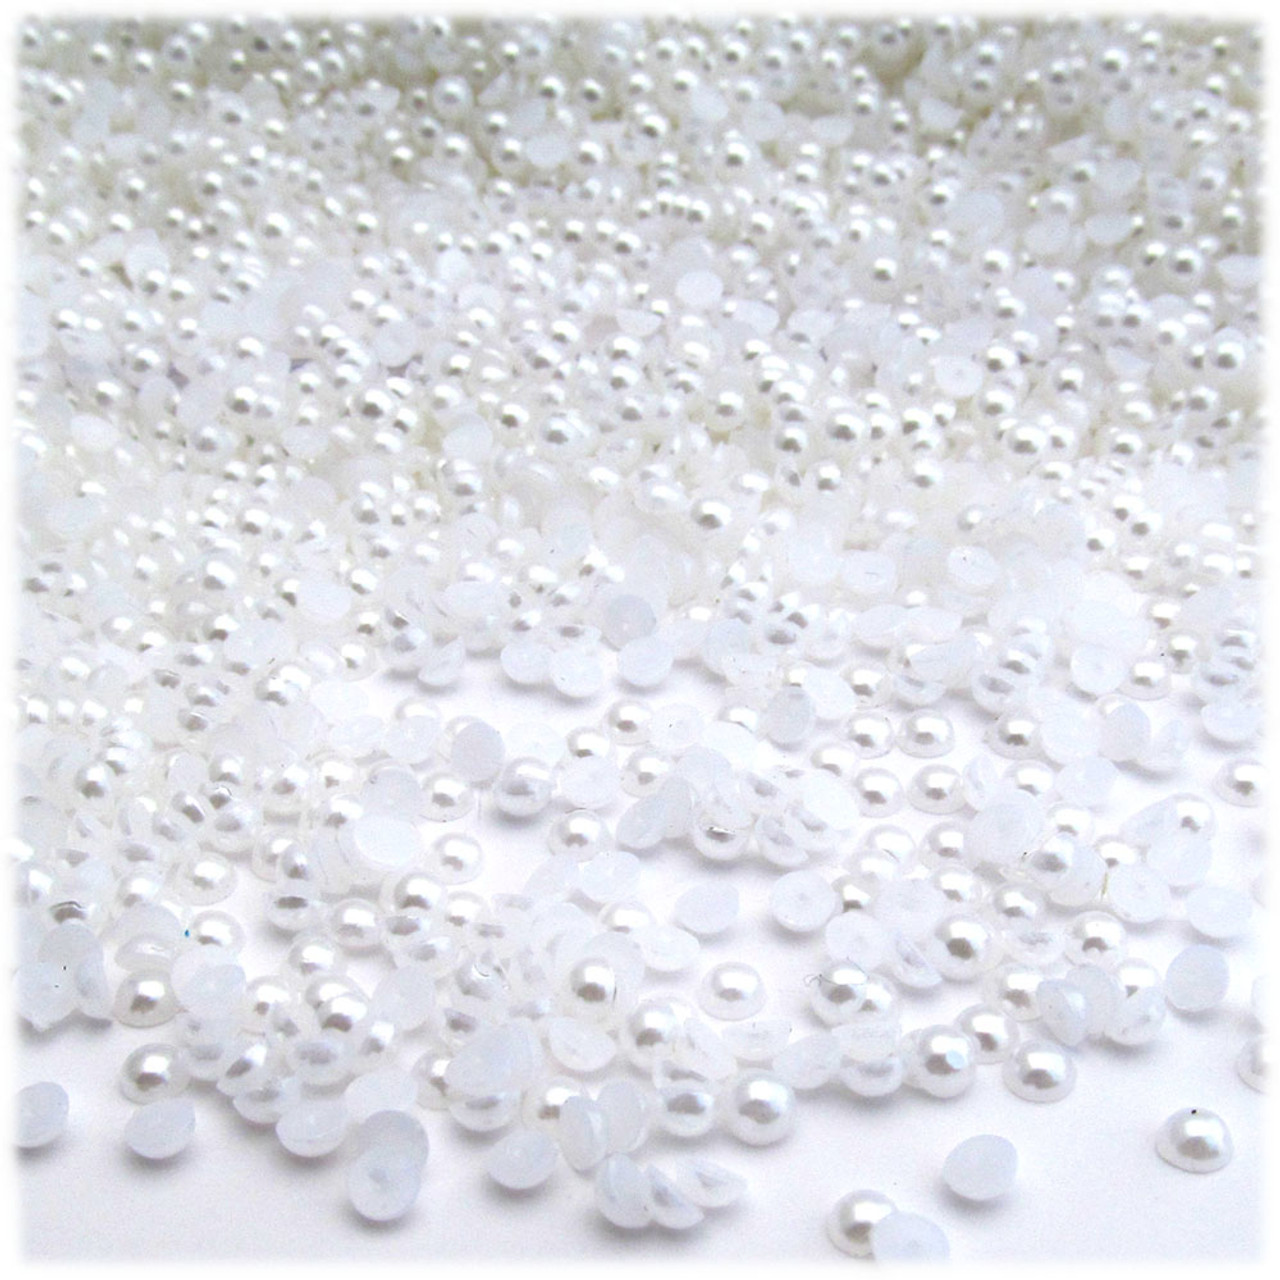 3MM FLAT BACK PEARLS, White, Round, 3MM